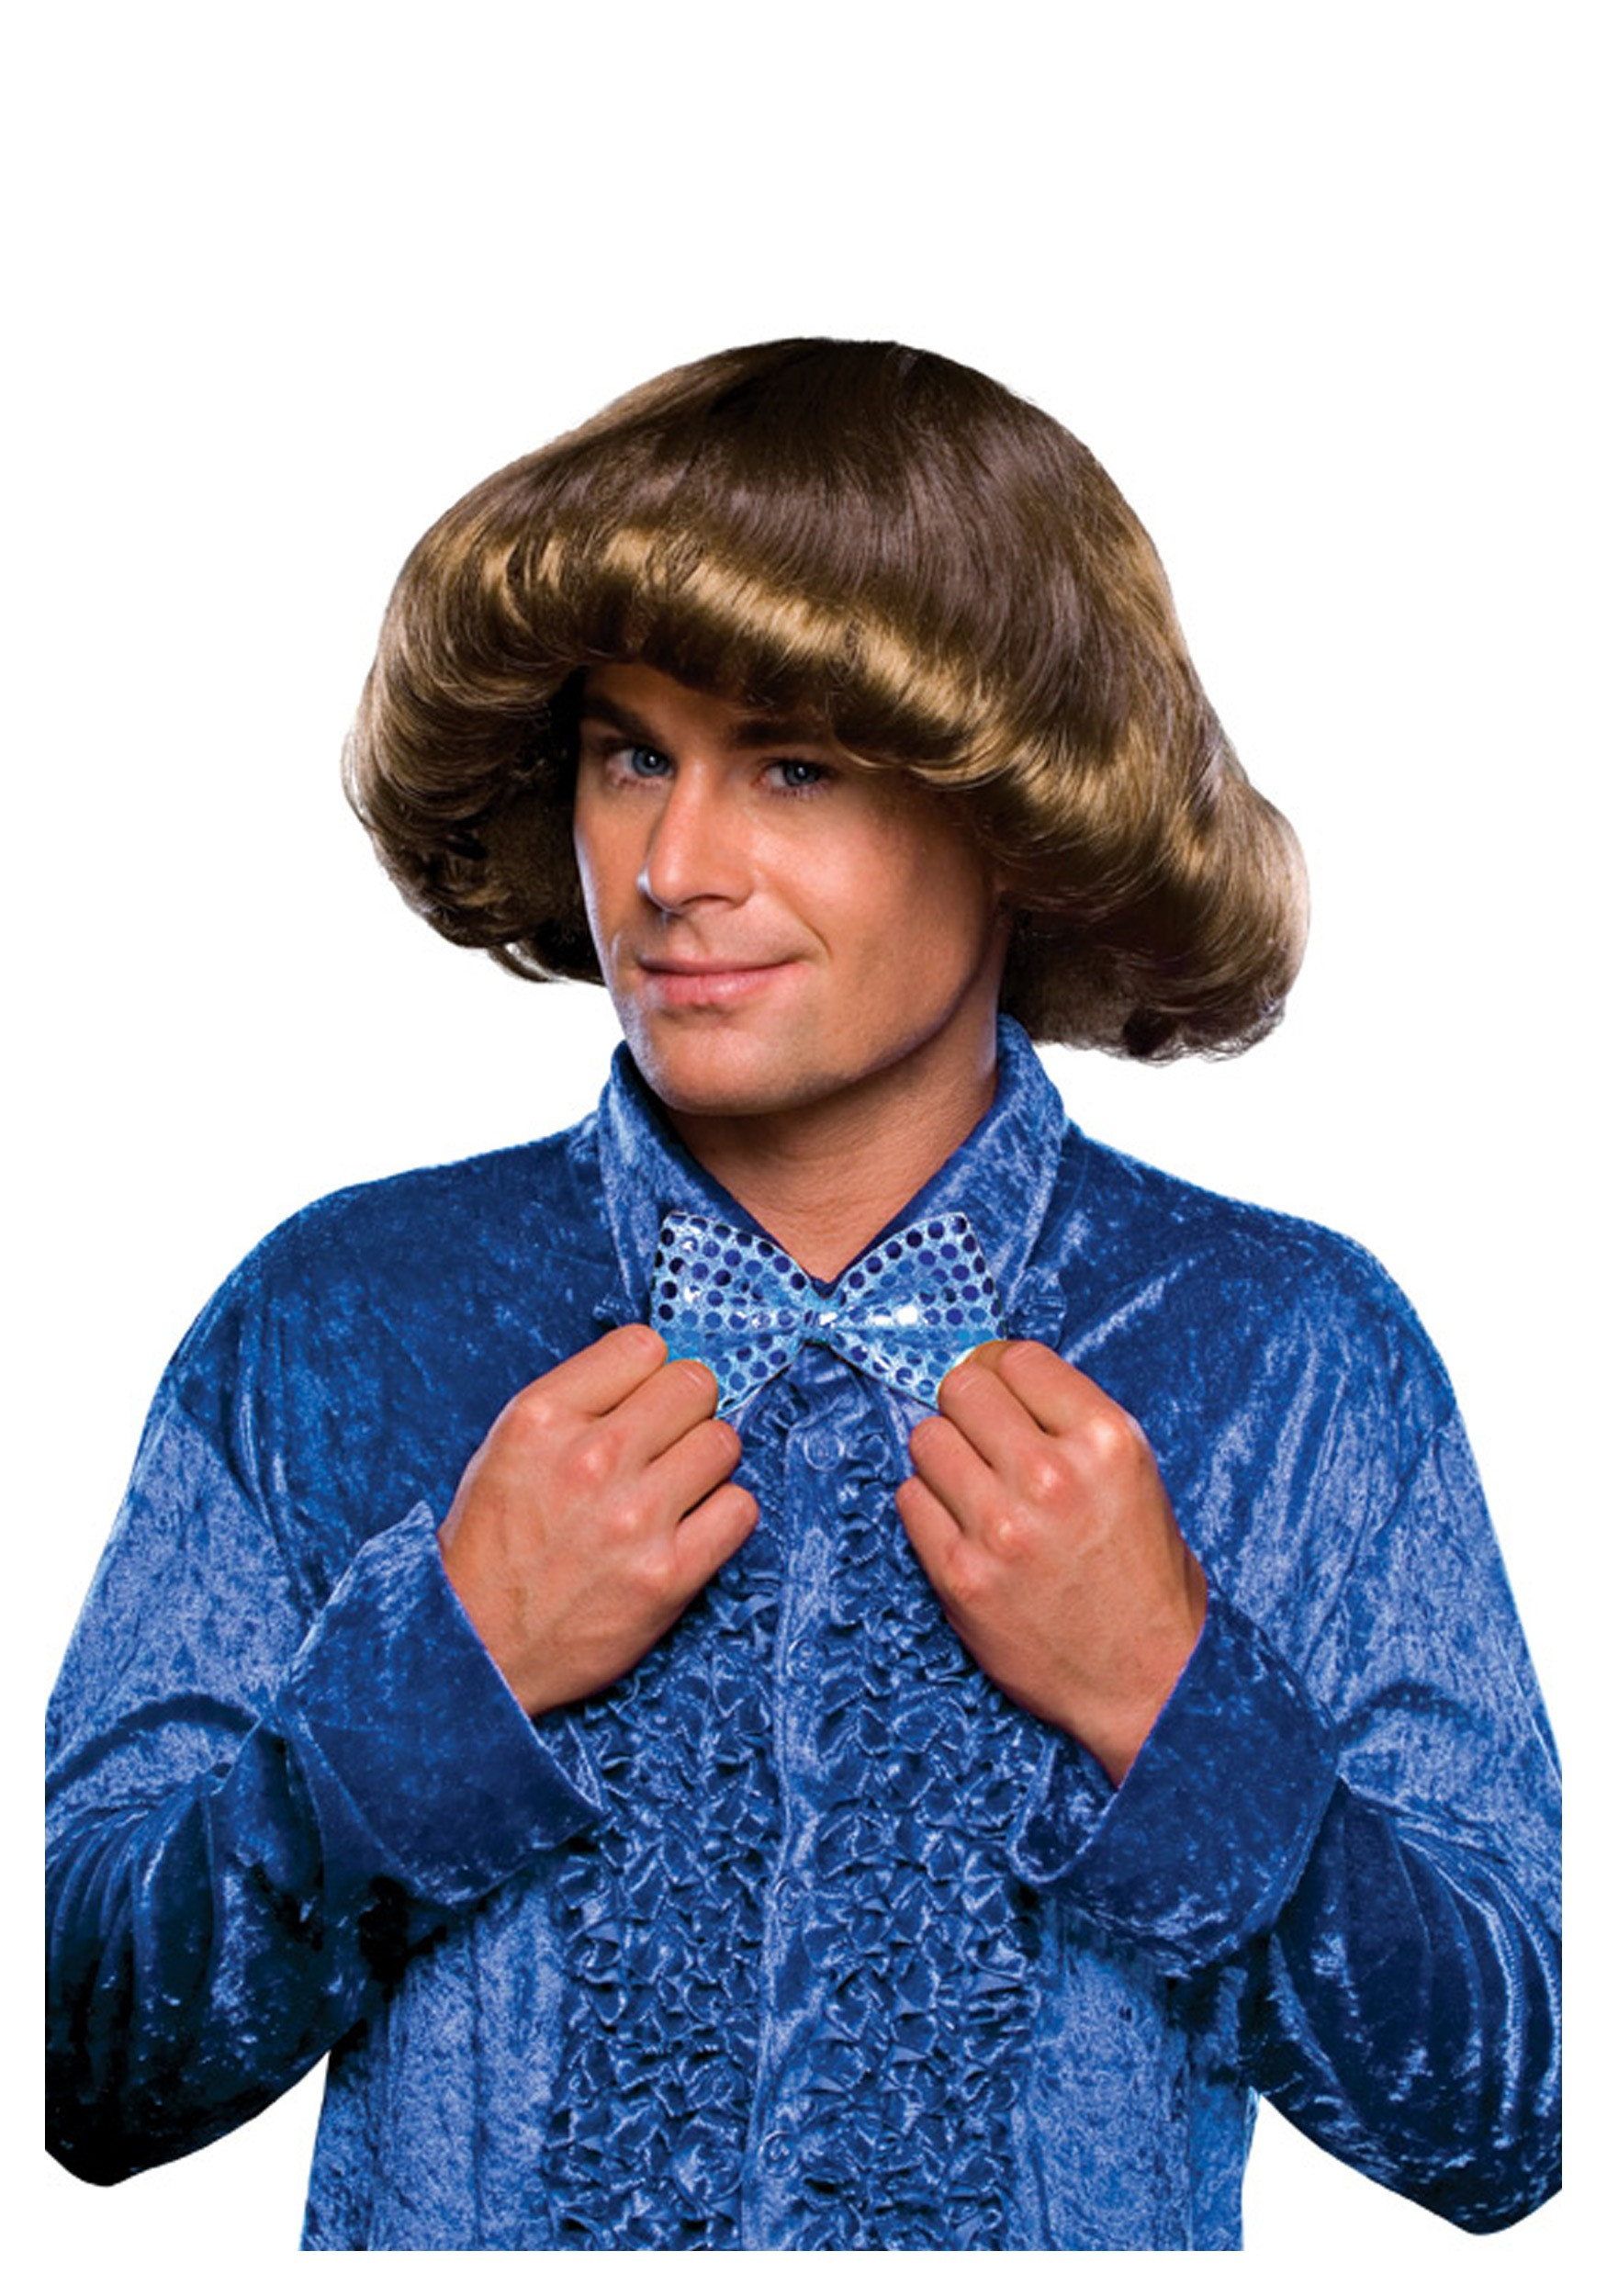 Prom Hairstyles For Boys
 Mens 70s Prom Wig